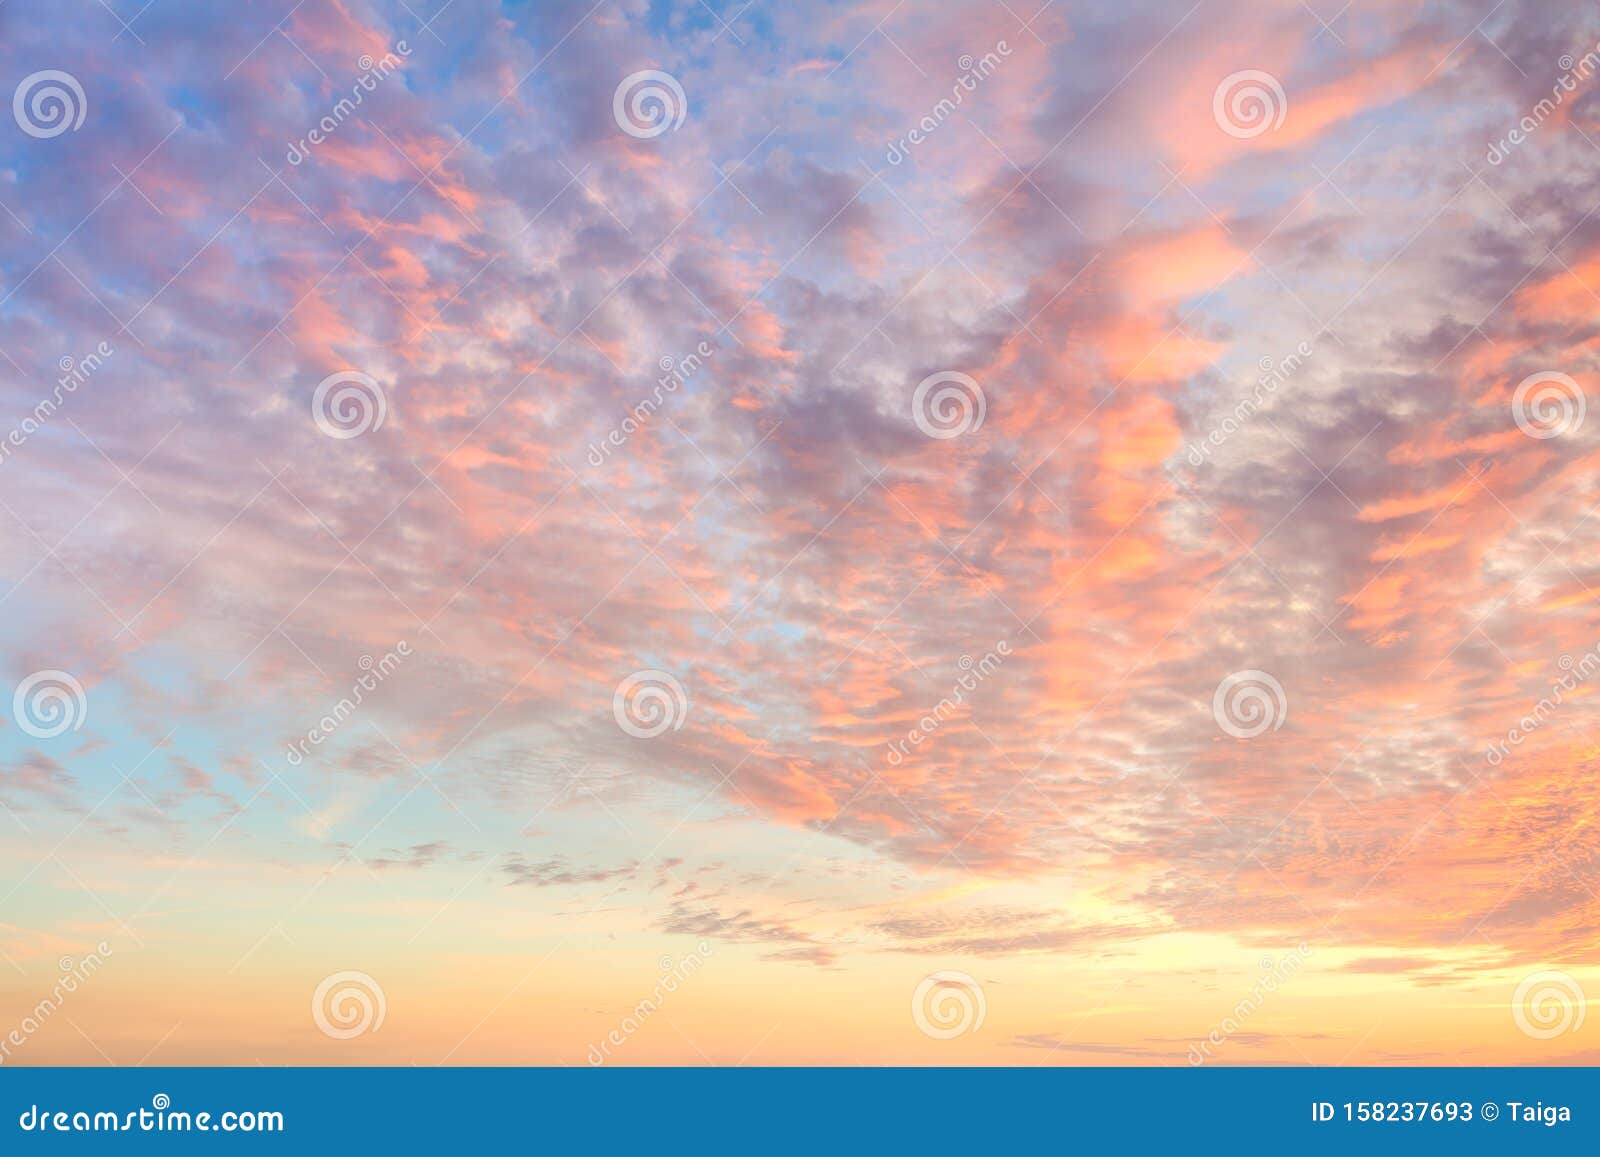 gentle colors of sky with light clouds - background at sunrise time